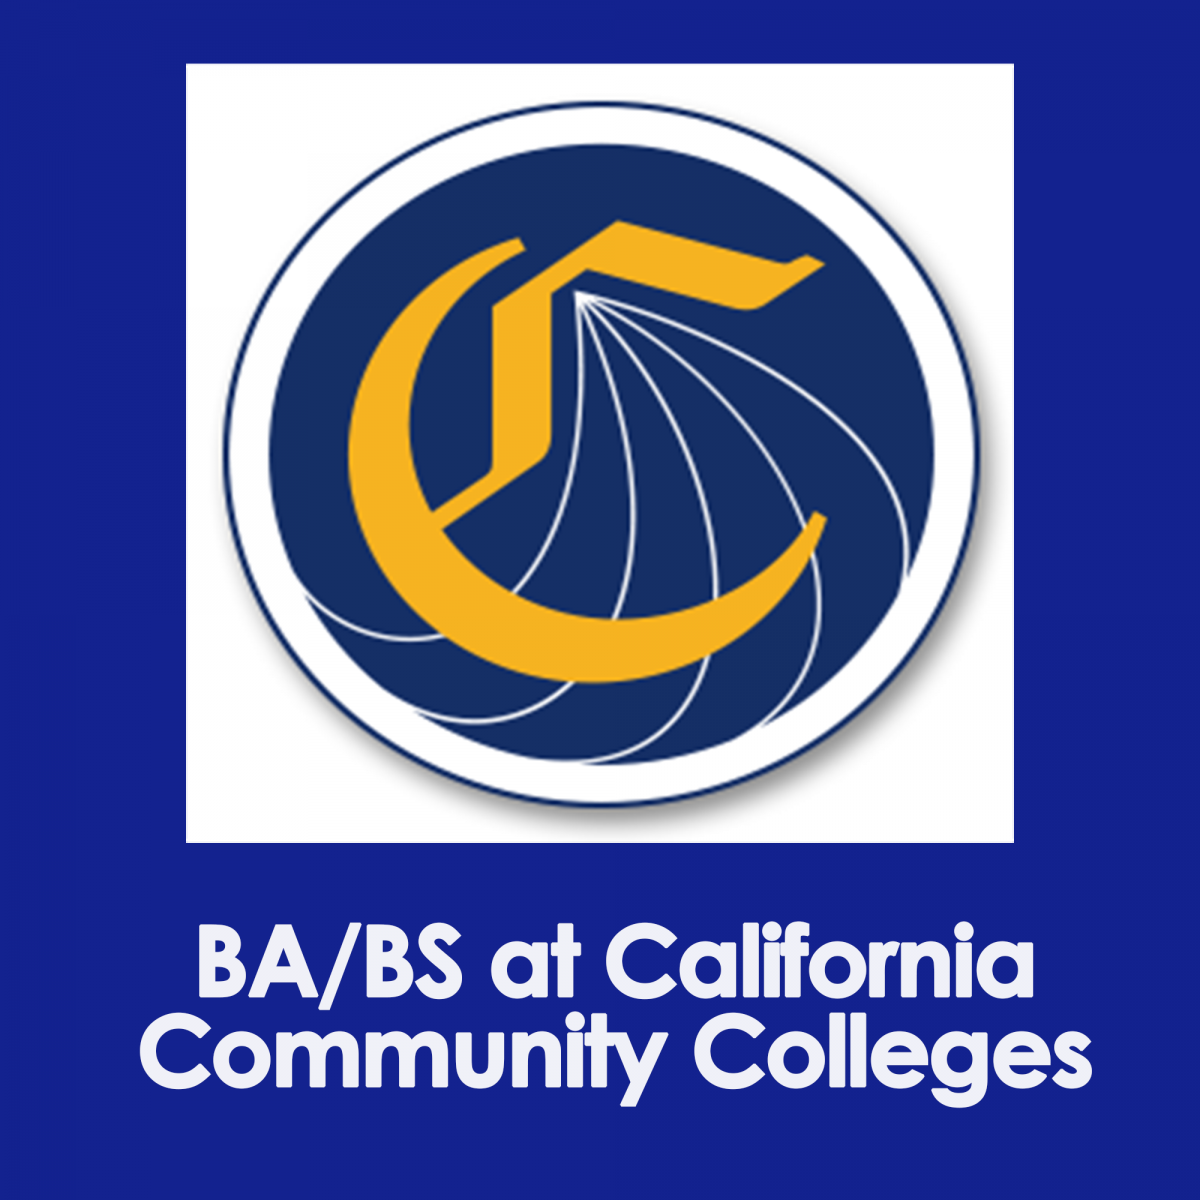 BA/BS at California Community Colleges